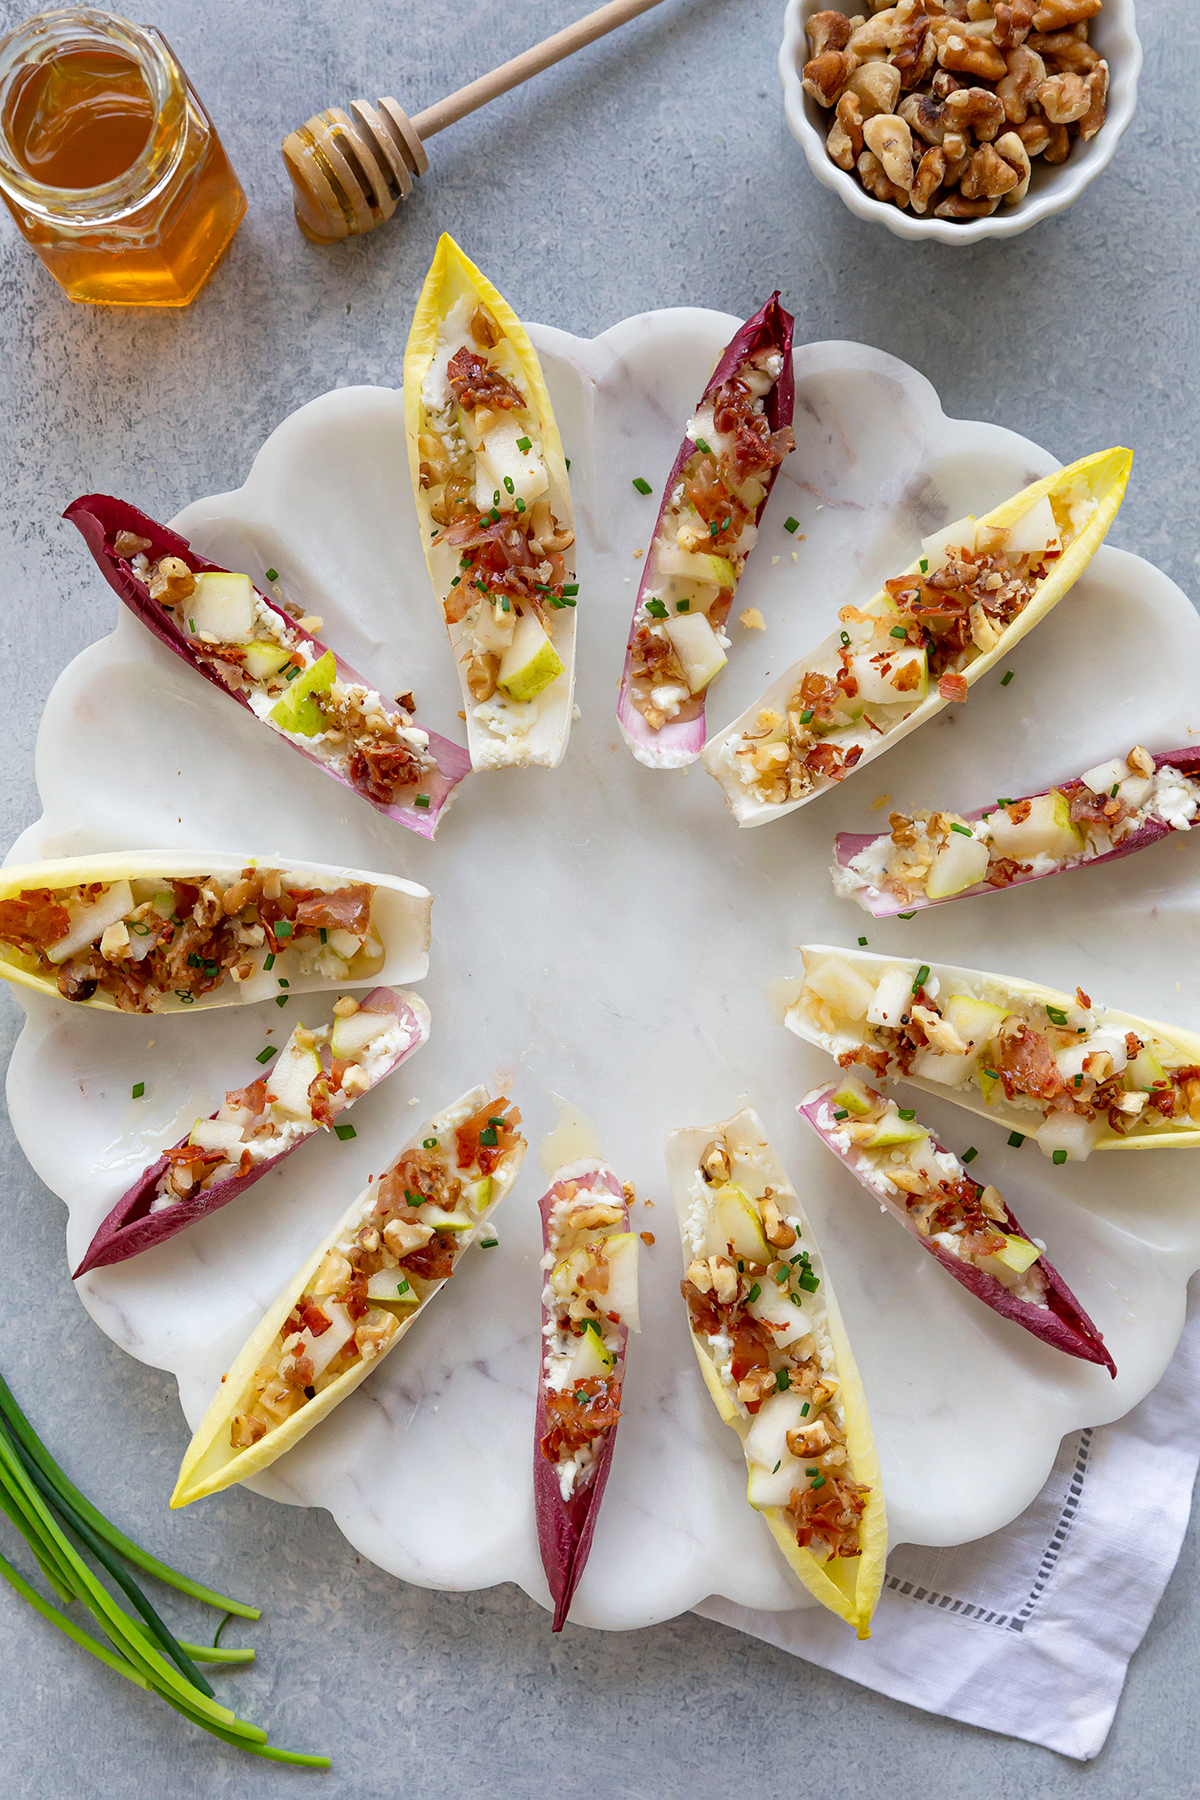 Stuffed Endive with Goat Cheese and Walnuts